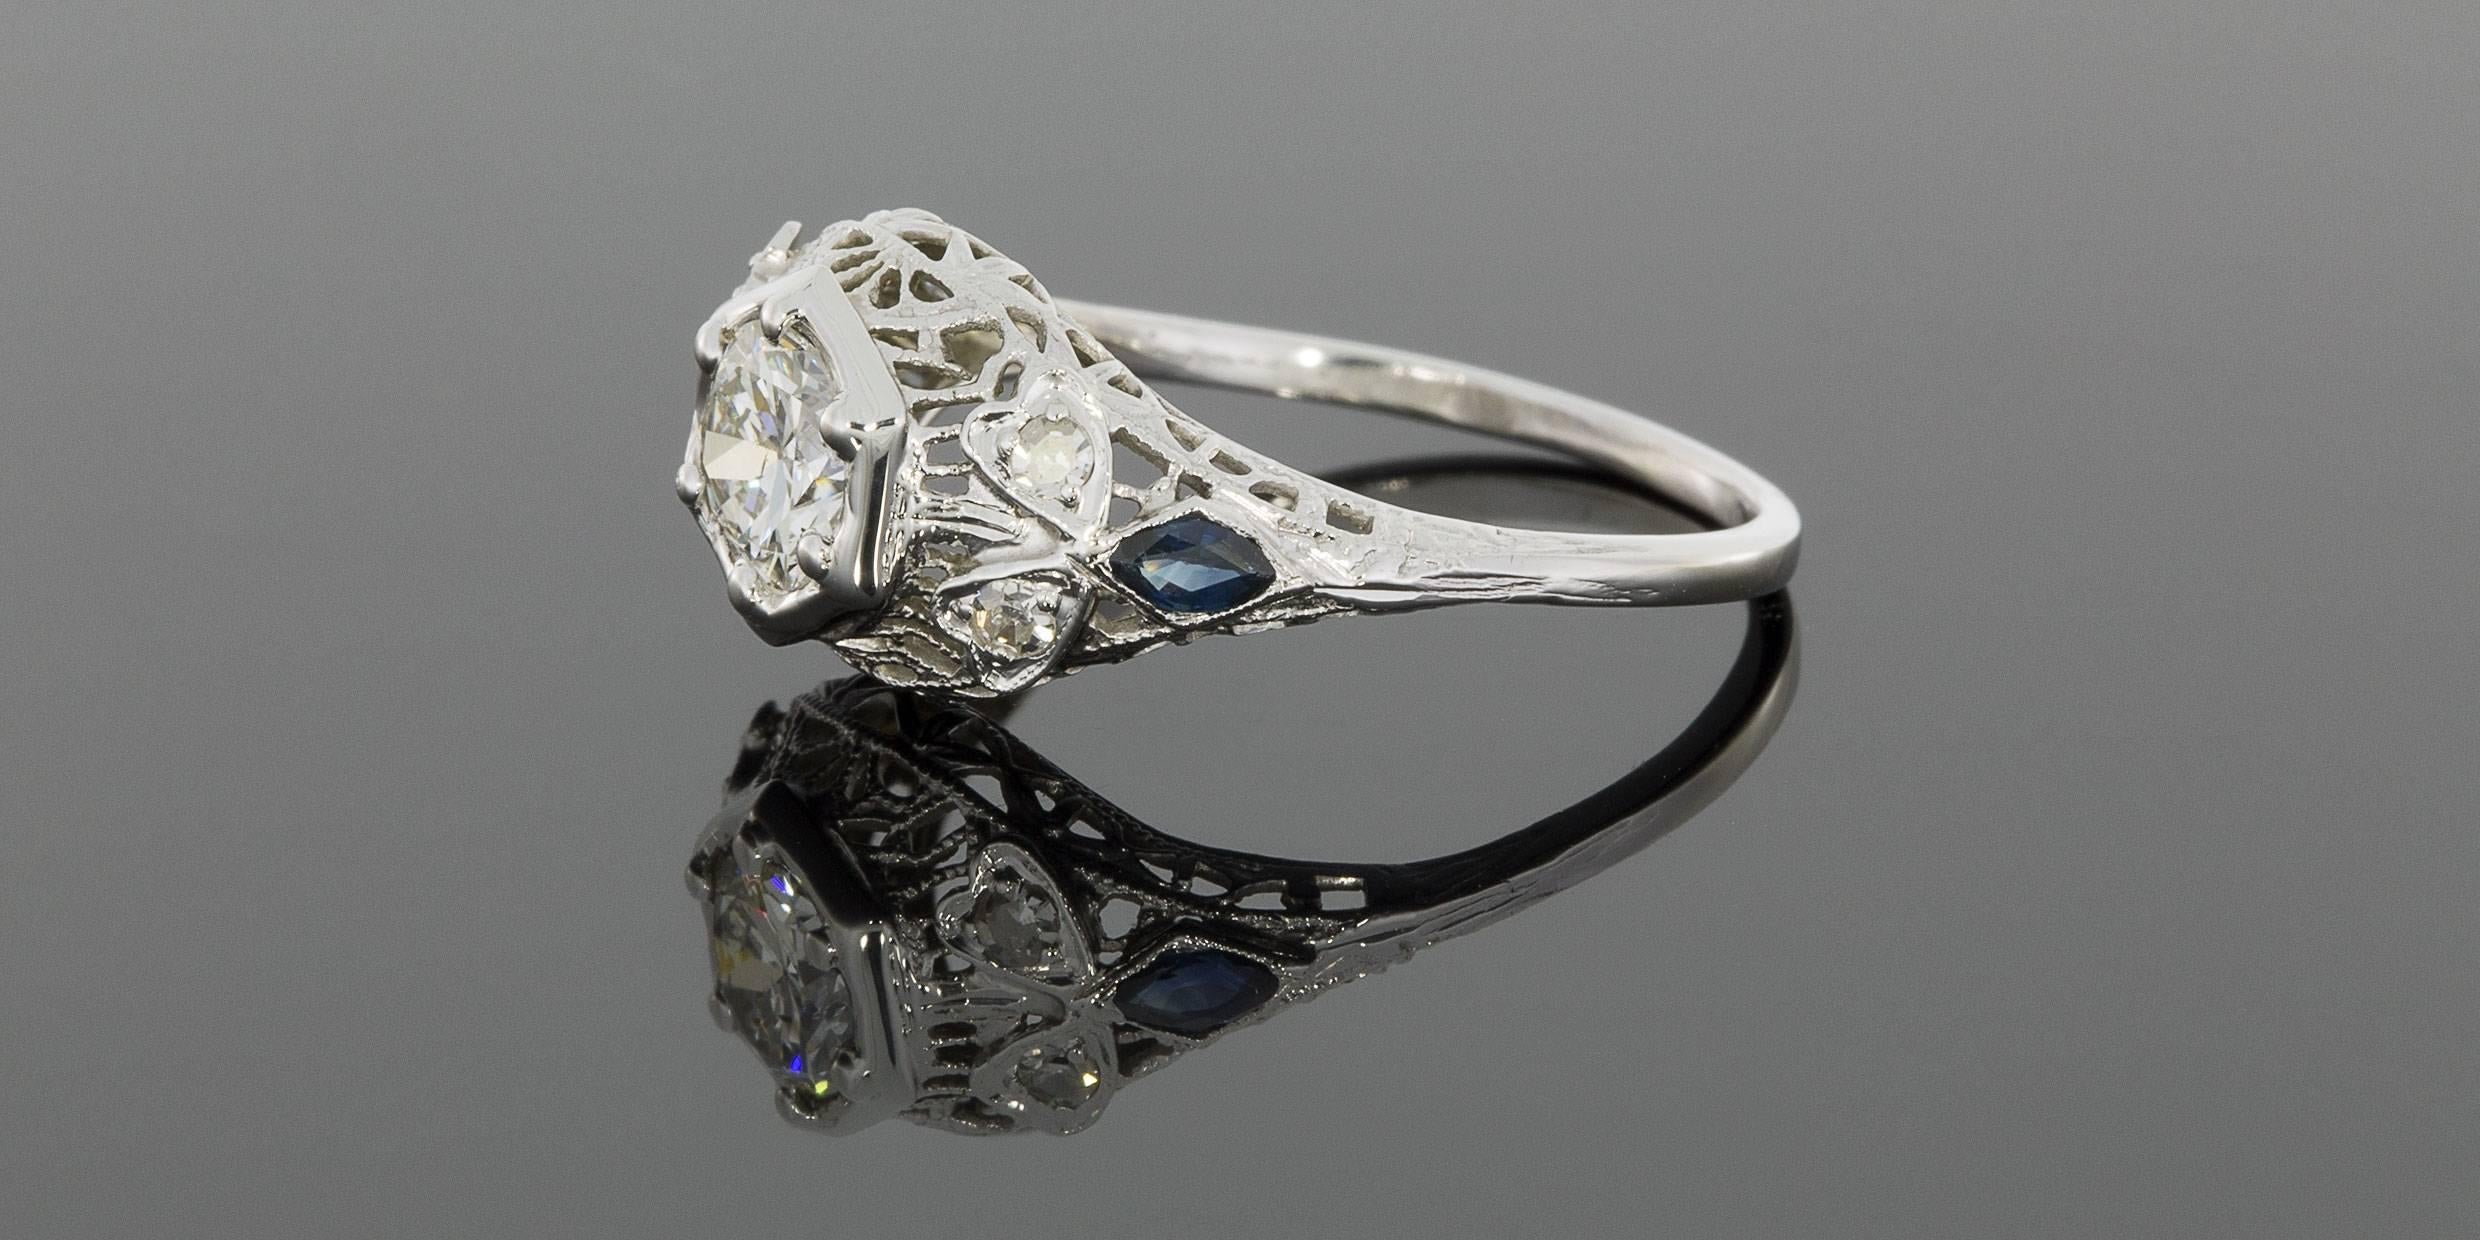 This beautiful, vintage diamond ring features a 3/4 carat circular brilliant cut center diamond that is an I/I1 in quality. This diamond is 6-prong set in a hexagon shaped top. Lovely, unique details can be found all over this treasure such as